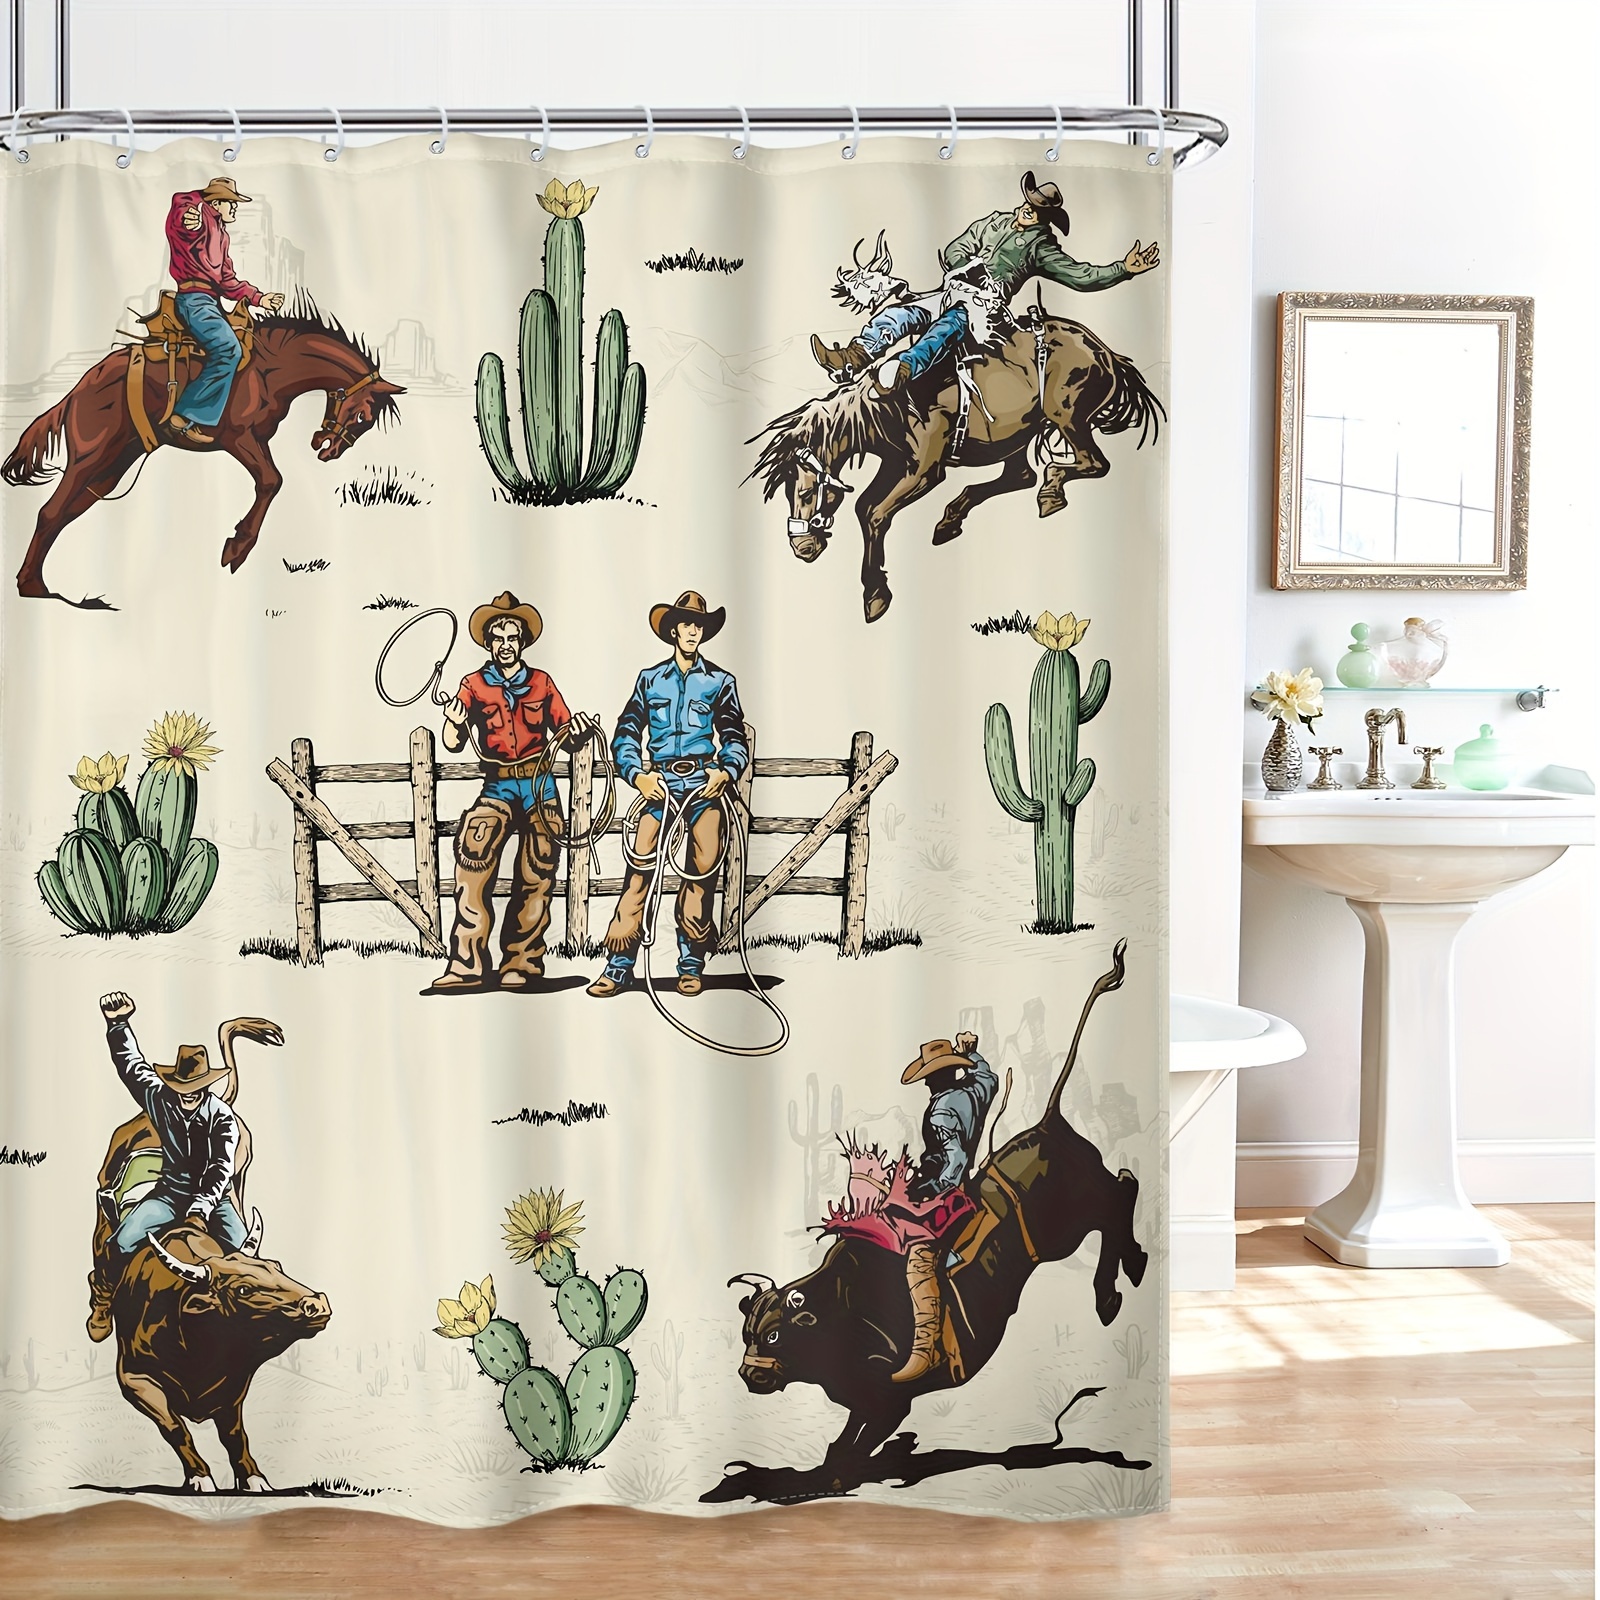 

1pc Western Cowboy Shower Curtain, Farmhouse Rodeo Riding Horse Bull West Rustic Cactus Country Shower Curtain Bath Accessories, Unique Art Home Decor Fabric 12 Pack Hooks, 60wx72h Inches